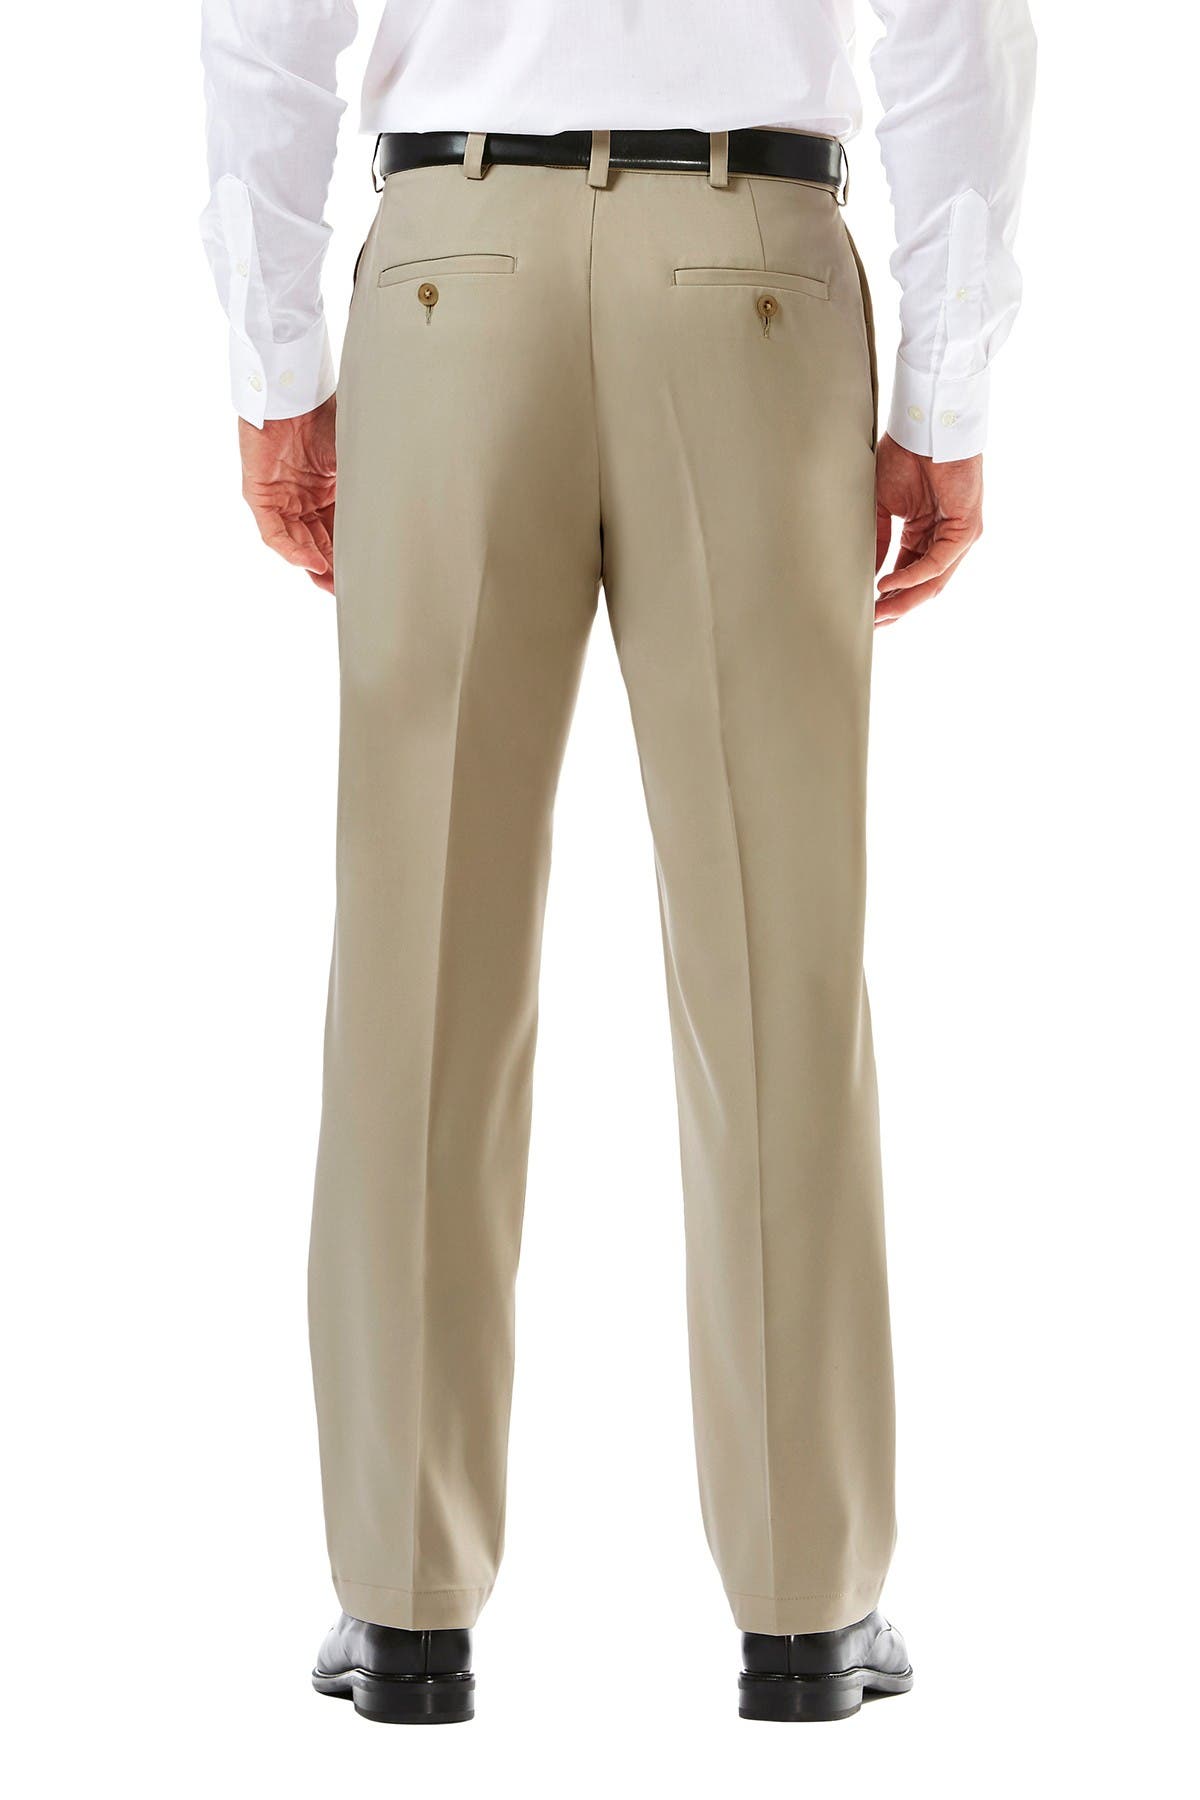 Haggar Cool 18 Pro Classic Fit Flat Front Pants In Open Beige10